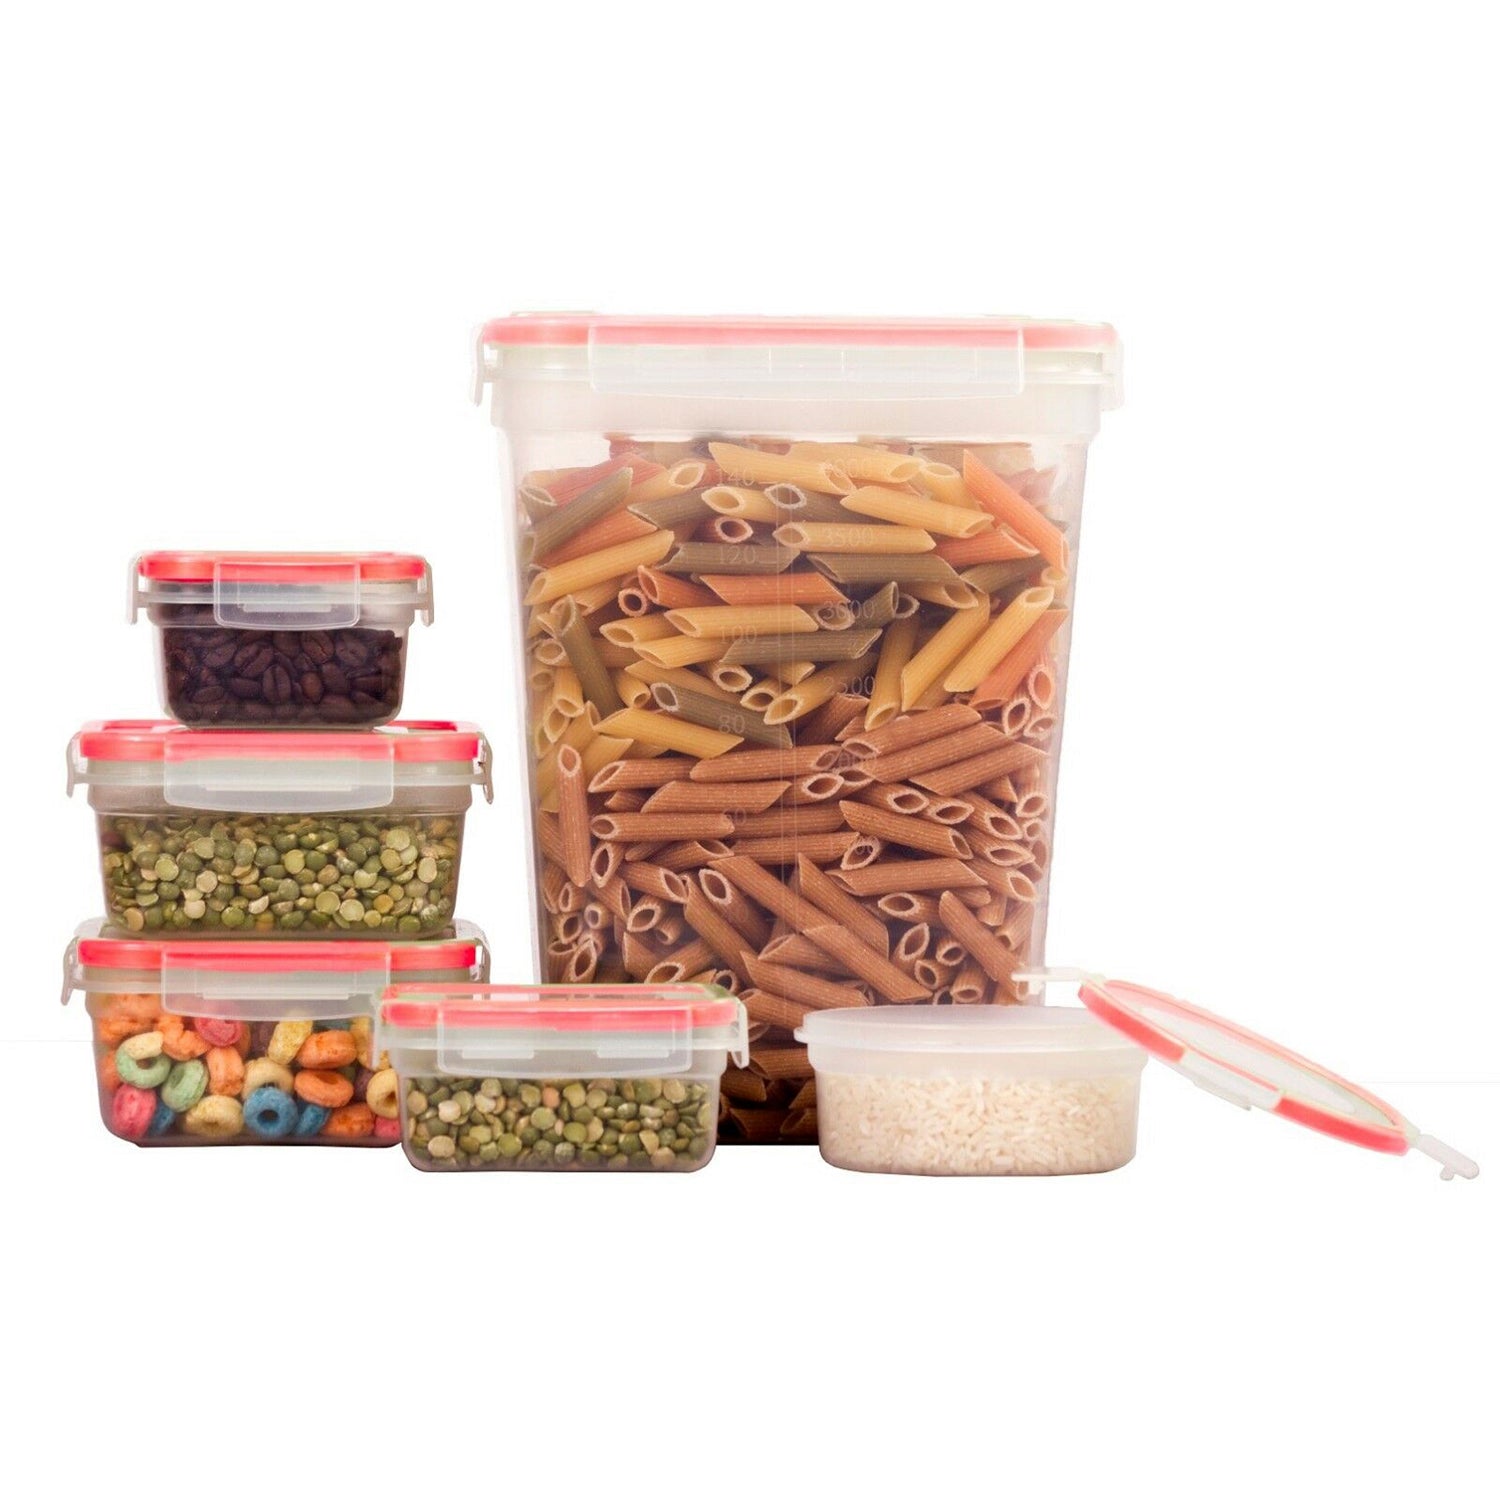 10 Pcs Plastic Food Storage Containers Set With Air Tight Locking Lids